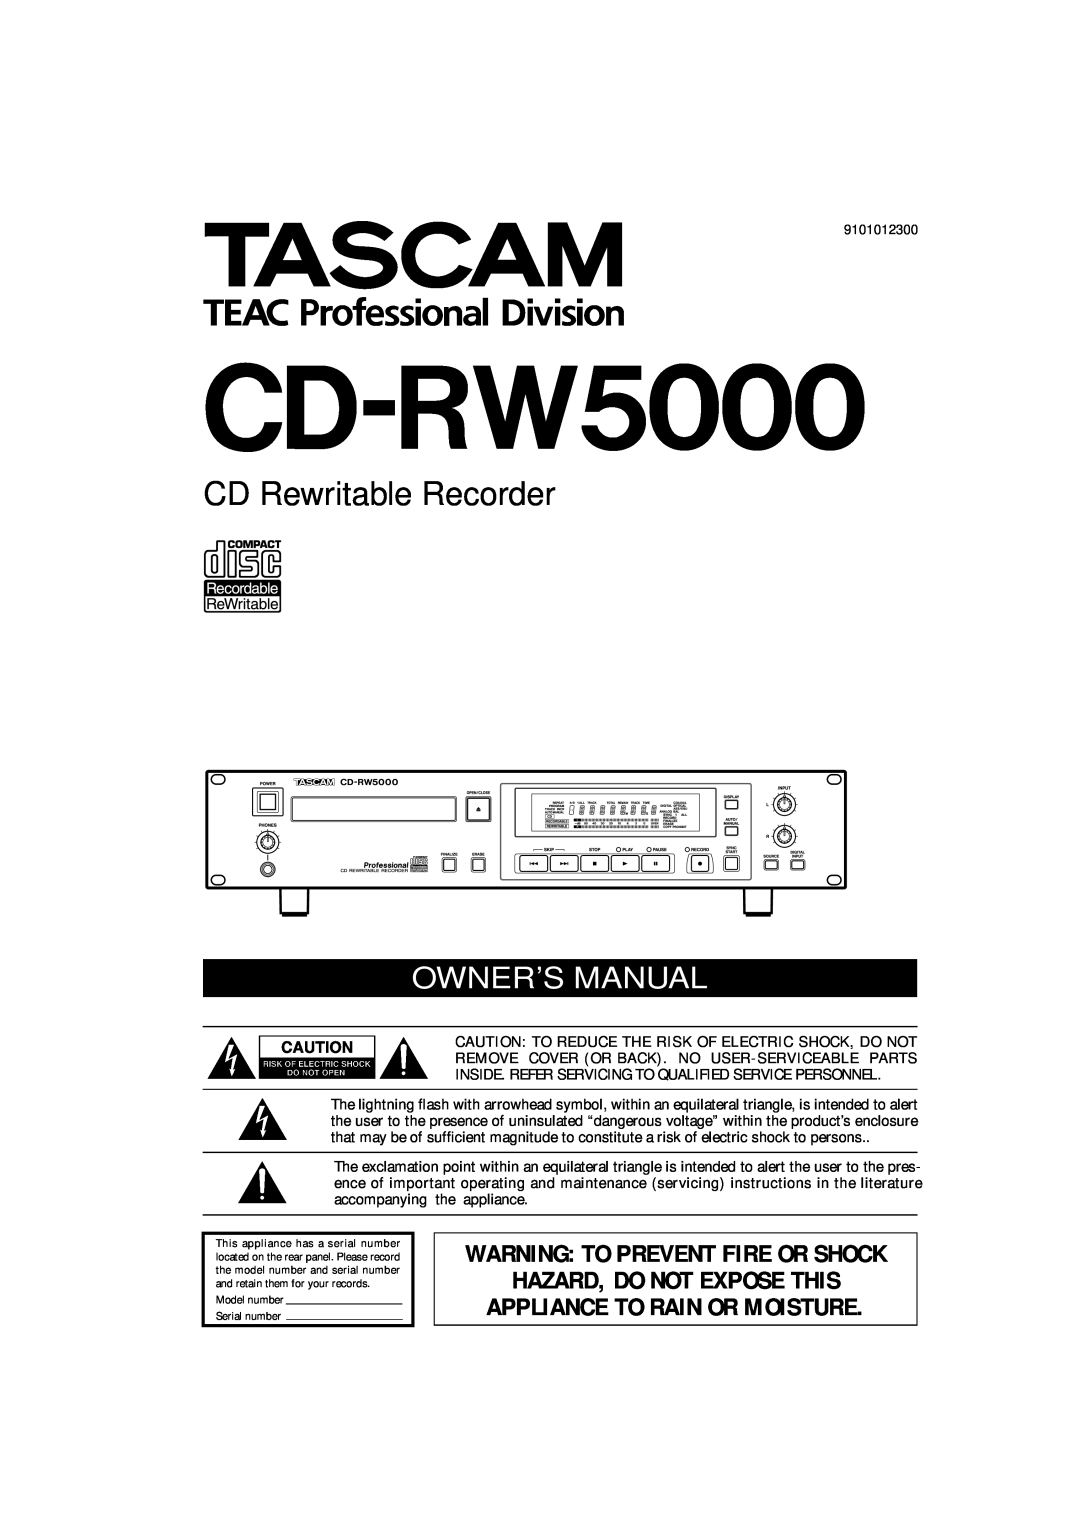 Tascam CD-RW5000 owner manual CD Rewritable Recorder, Hazard, Do Not Expose This, Appliance To Rain Or Moisture 